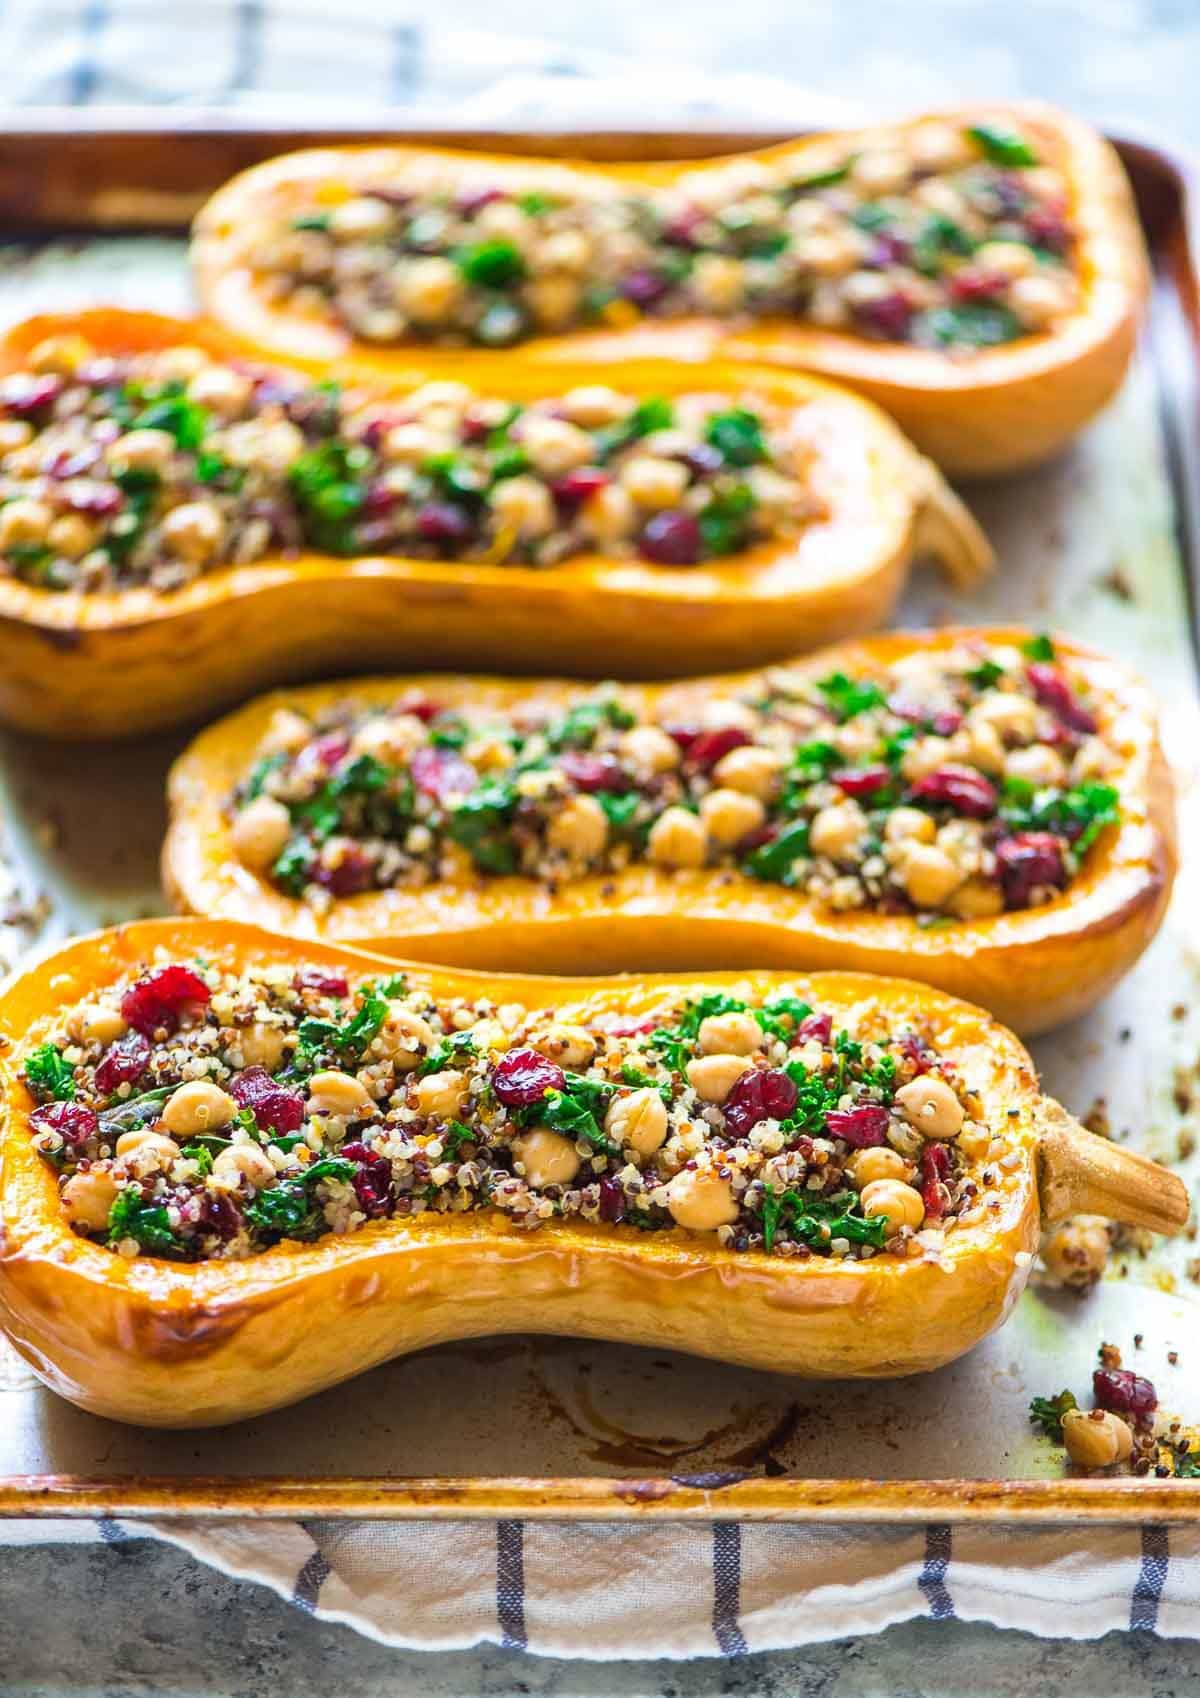 Vegetarian Fall Dinner Recipes
 Quinoa Stuffed Butternut Squash with Cranberries and Kale